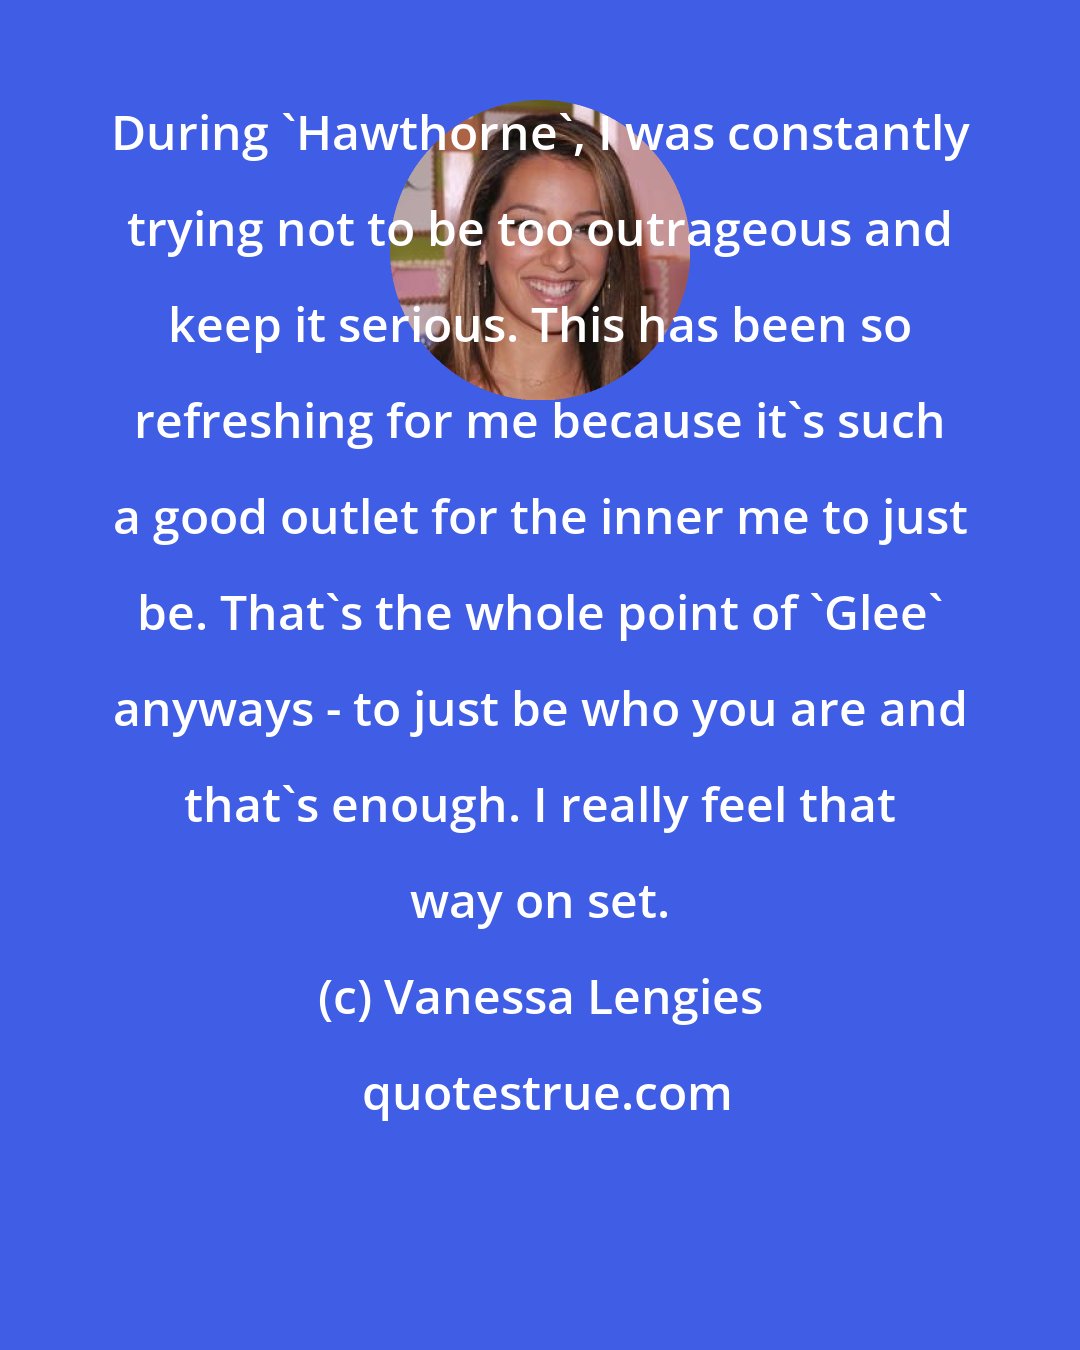 Vanessa Lengies: During 'Hawthorne', I was constantly trying not to be too outrageous and keep it serious. This has been so refreshing for me because it's such a good outlet for the inner me to just be. That's the whole point of 'Glee' anyways - to just be who you are and that's enough. I really feel that way on set.